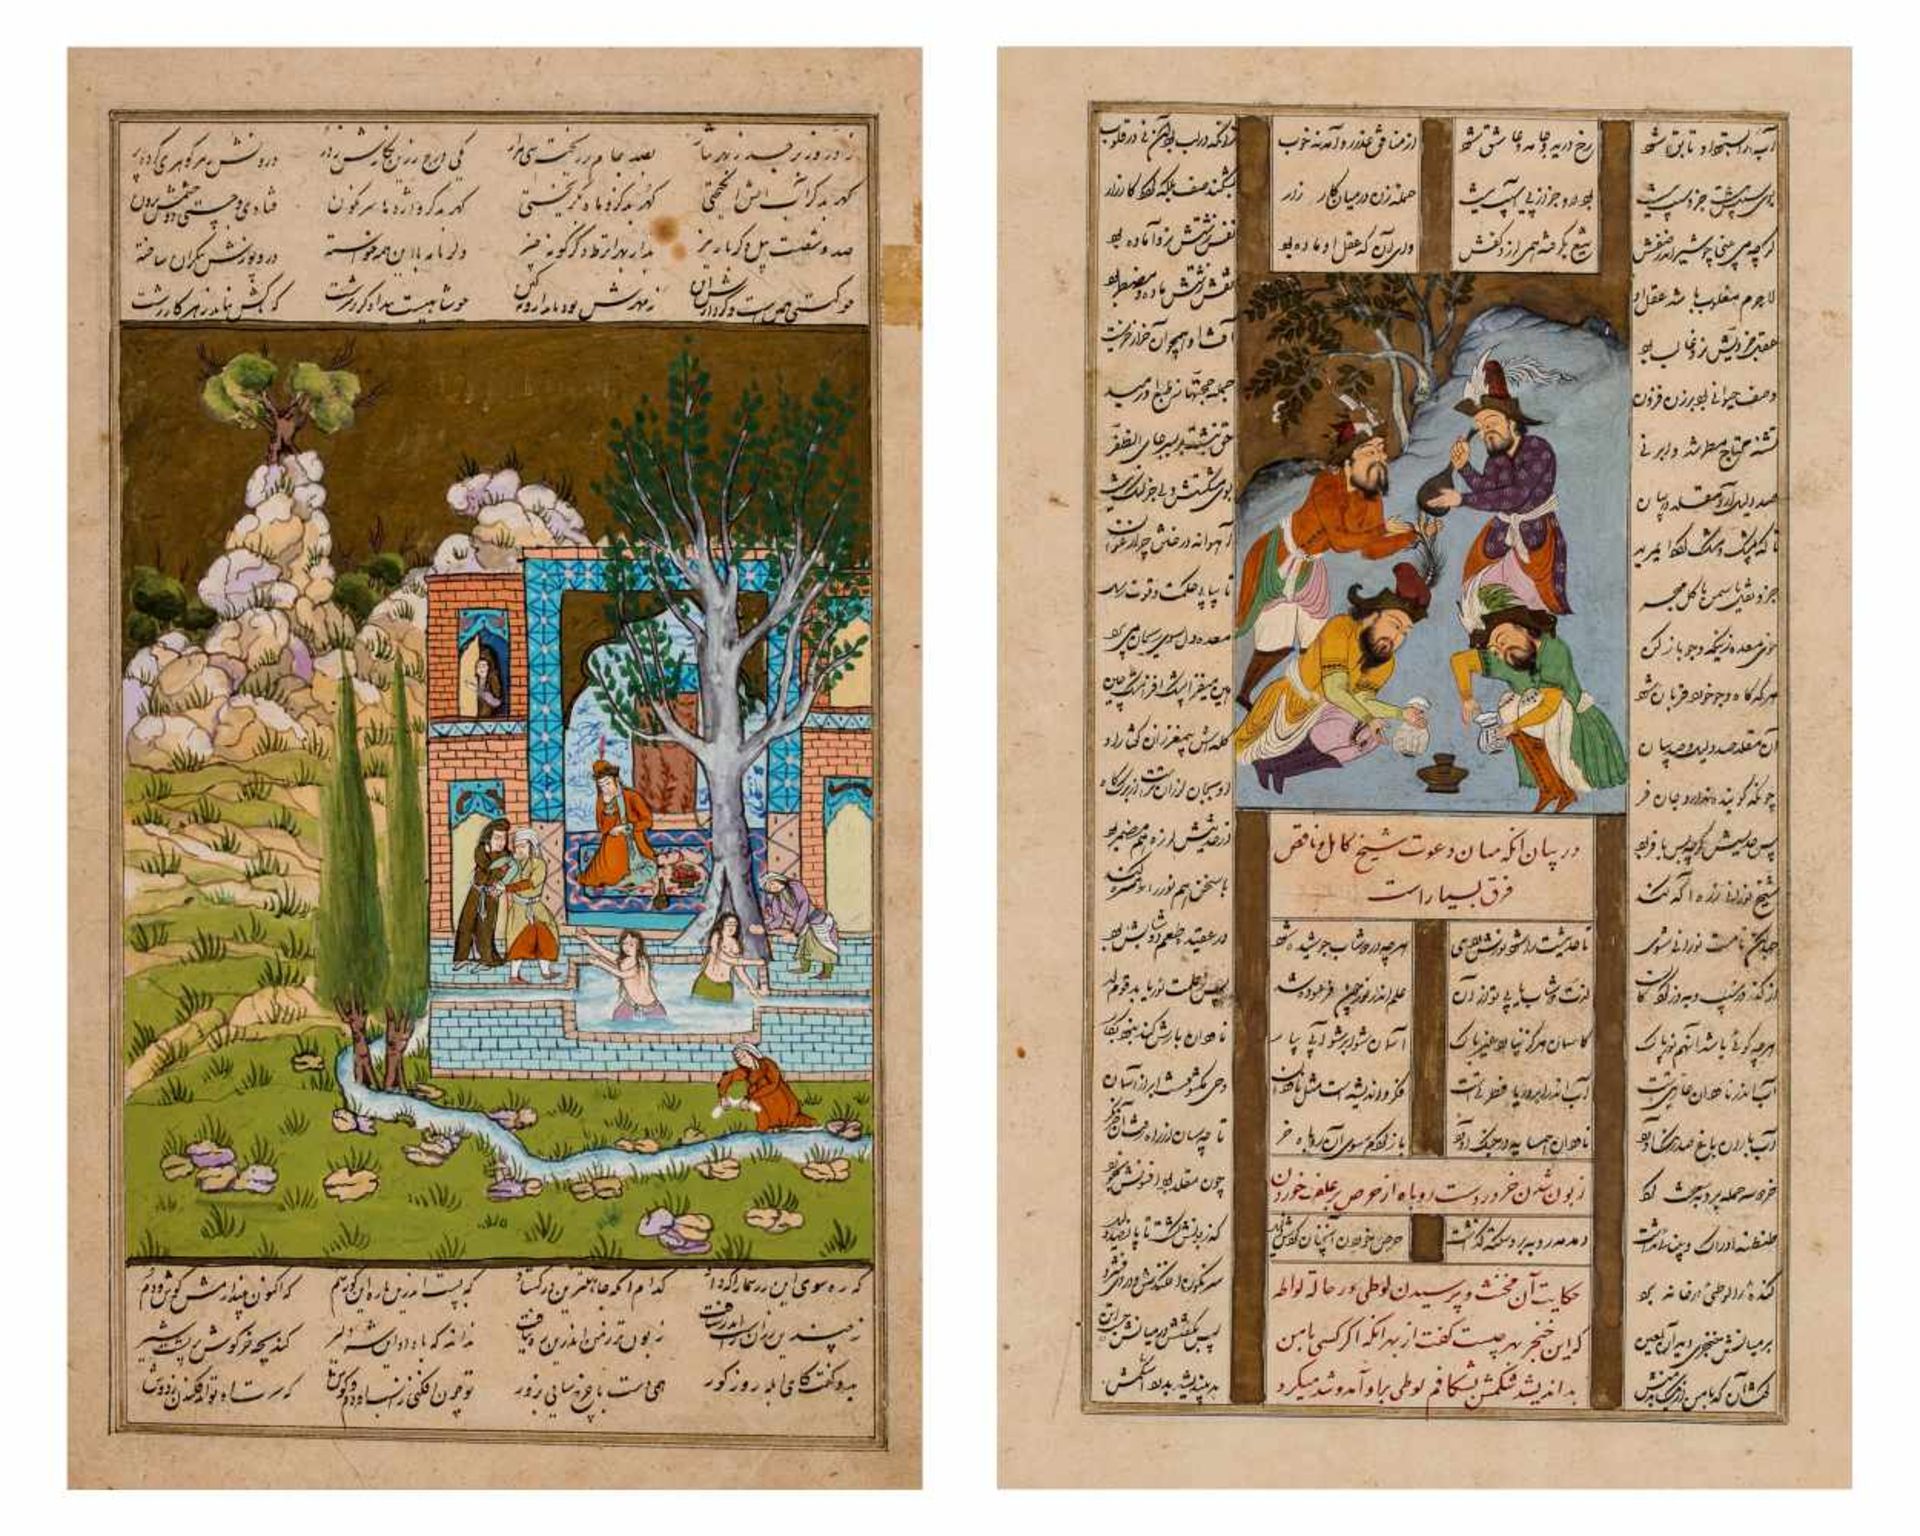 TWO INDO-PERSIAN MINIATURE PAINTINGS WITH CALLIGRAPHY - 19th CENTURYMiniature painting with colors